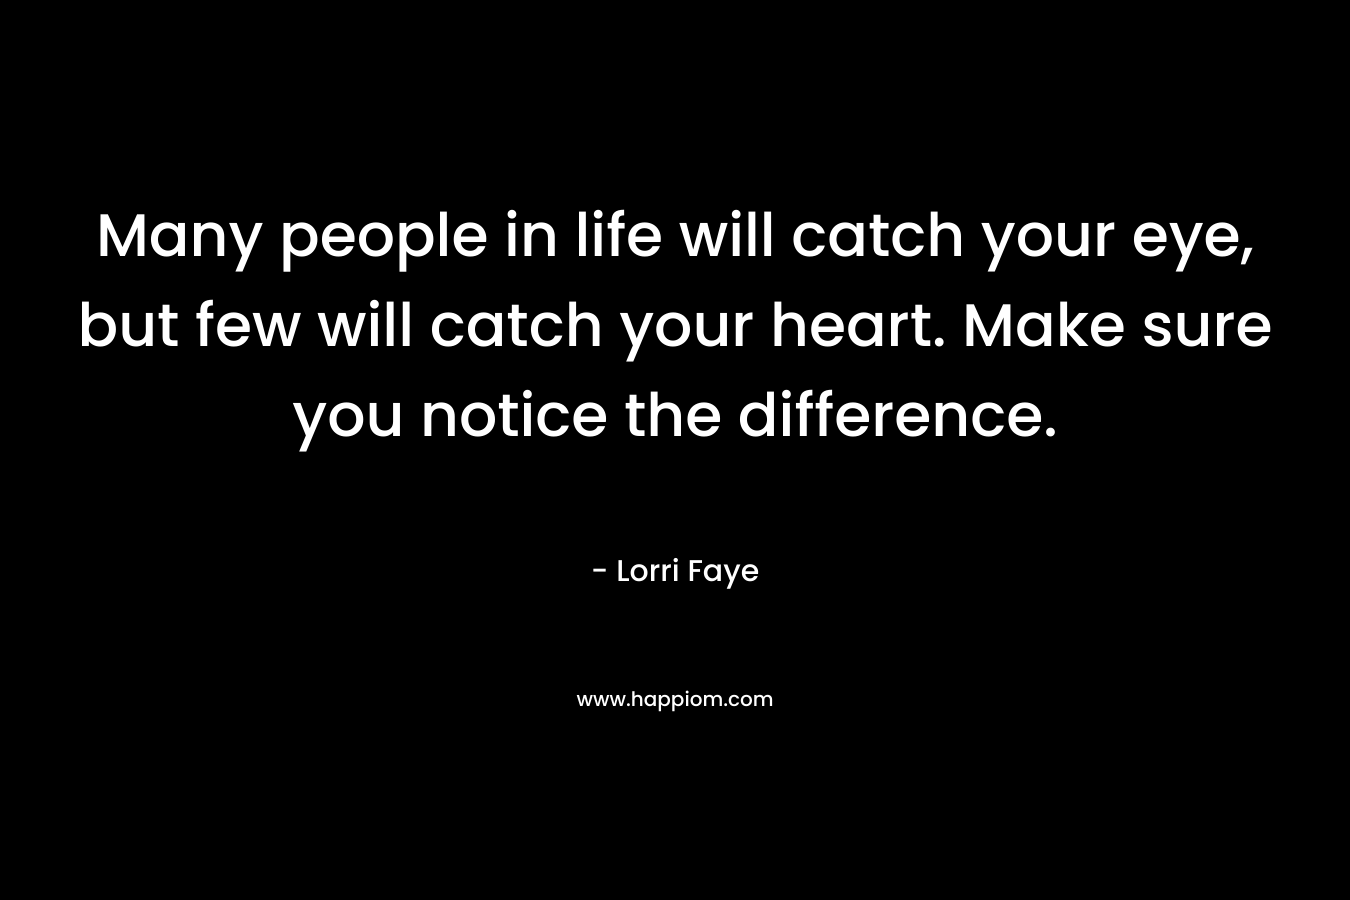 Many people in life will catch your eye, but few will catch your heart. Make sure you notice the difference.